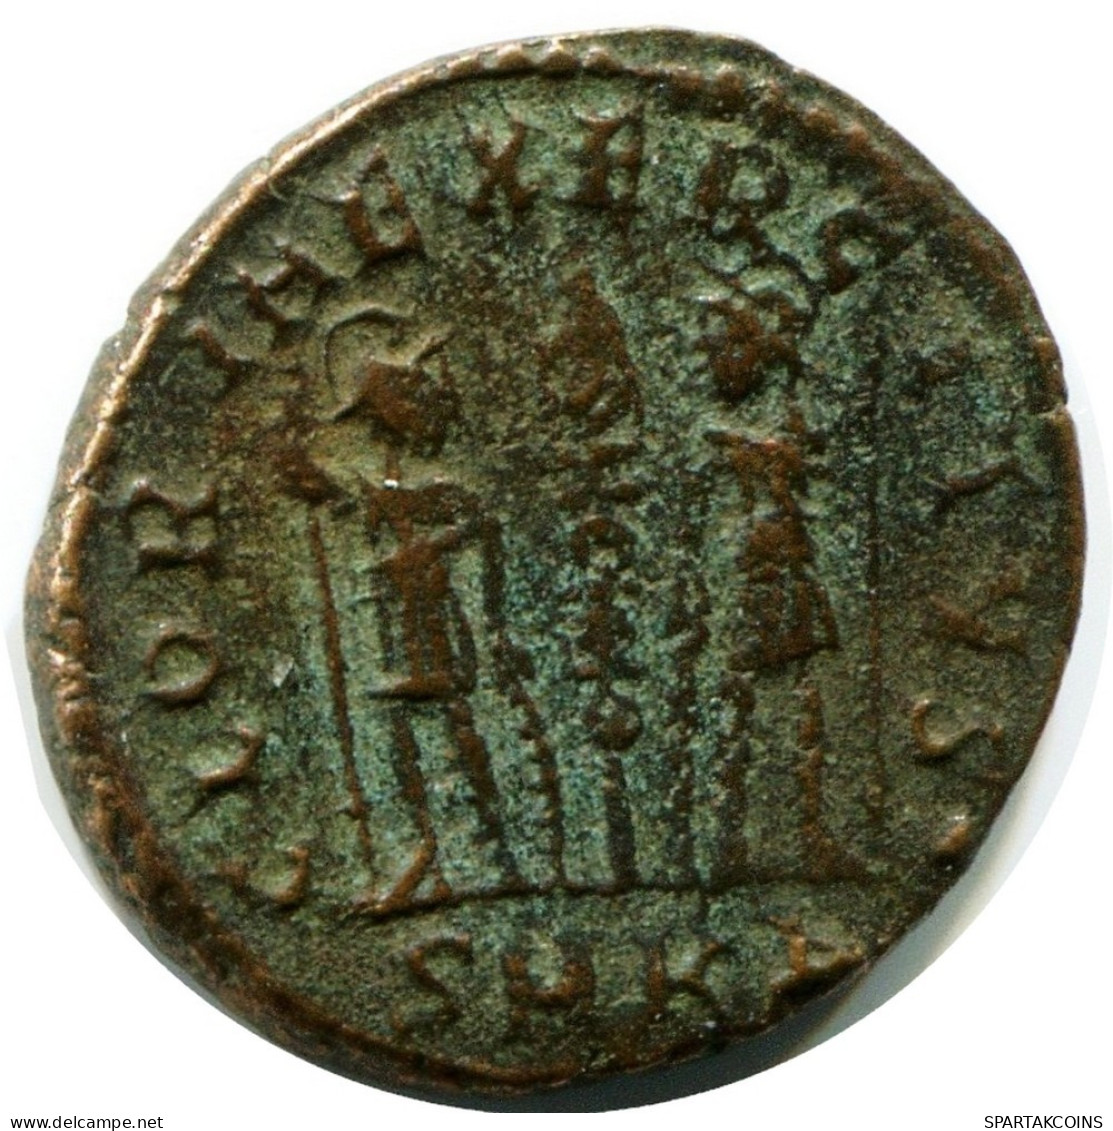 CONSTANS MINTED IN CYZICUS FOUND IN IHNASYAH HOARD EGYPT #ANC11639.14.D.A - The Christian Empire (307 AD Tot 363 AD)